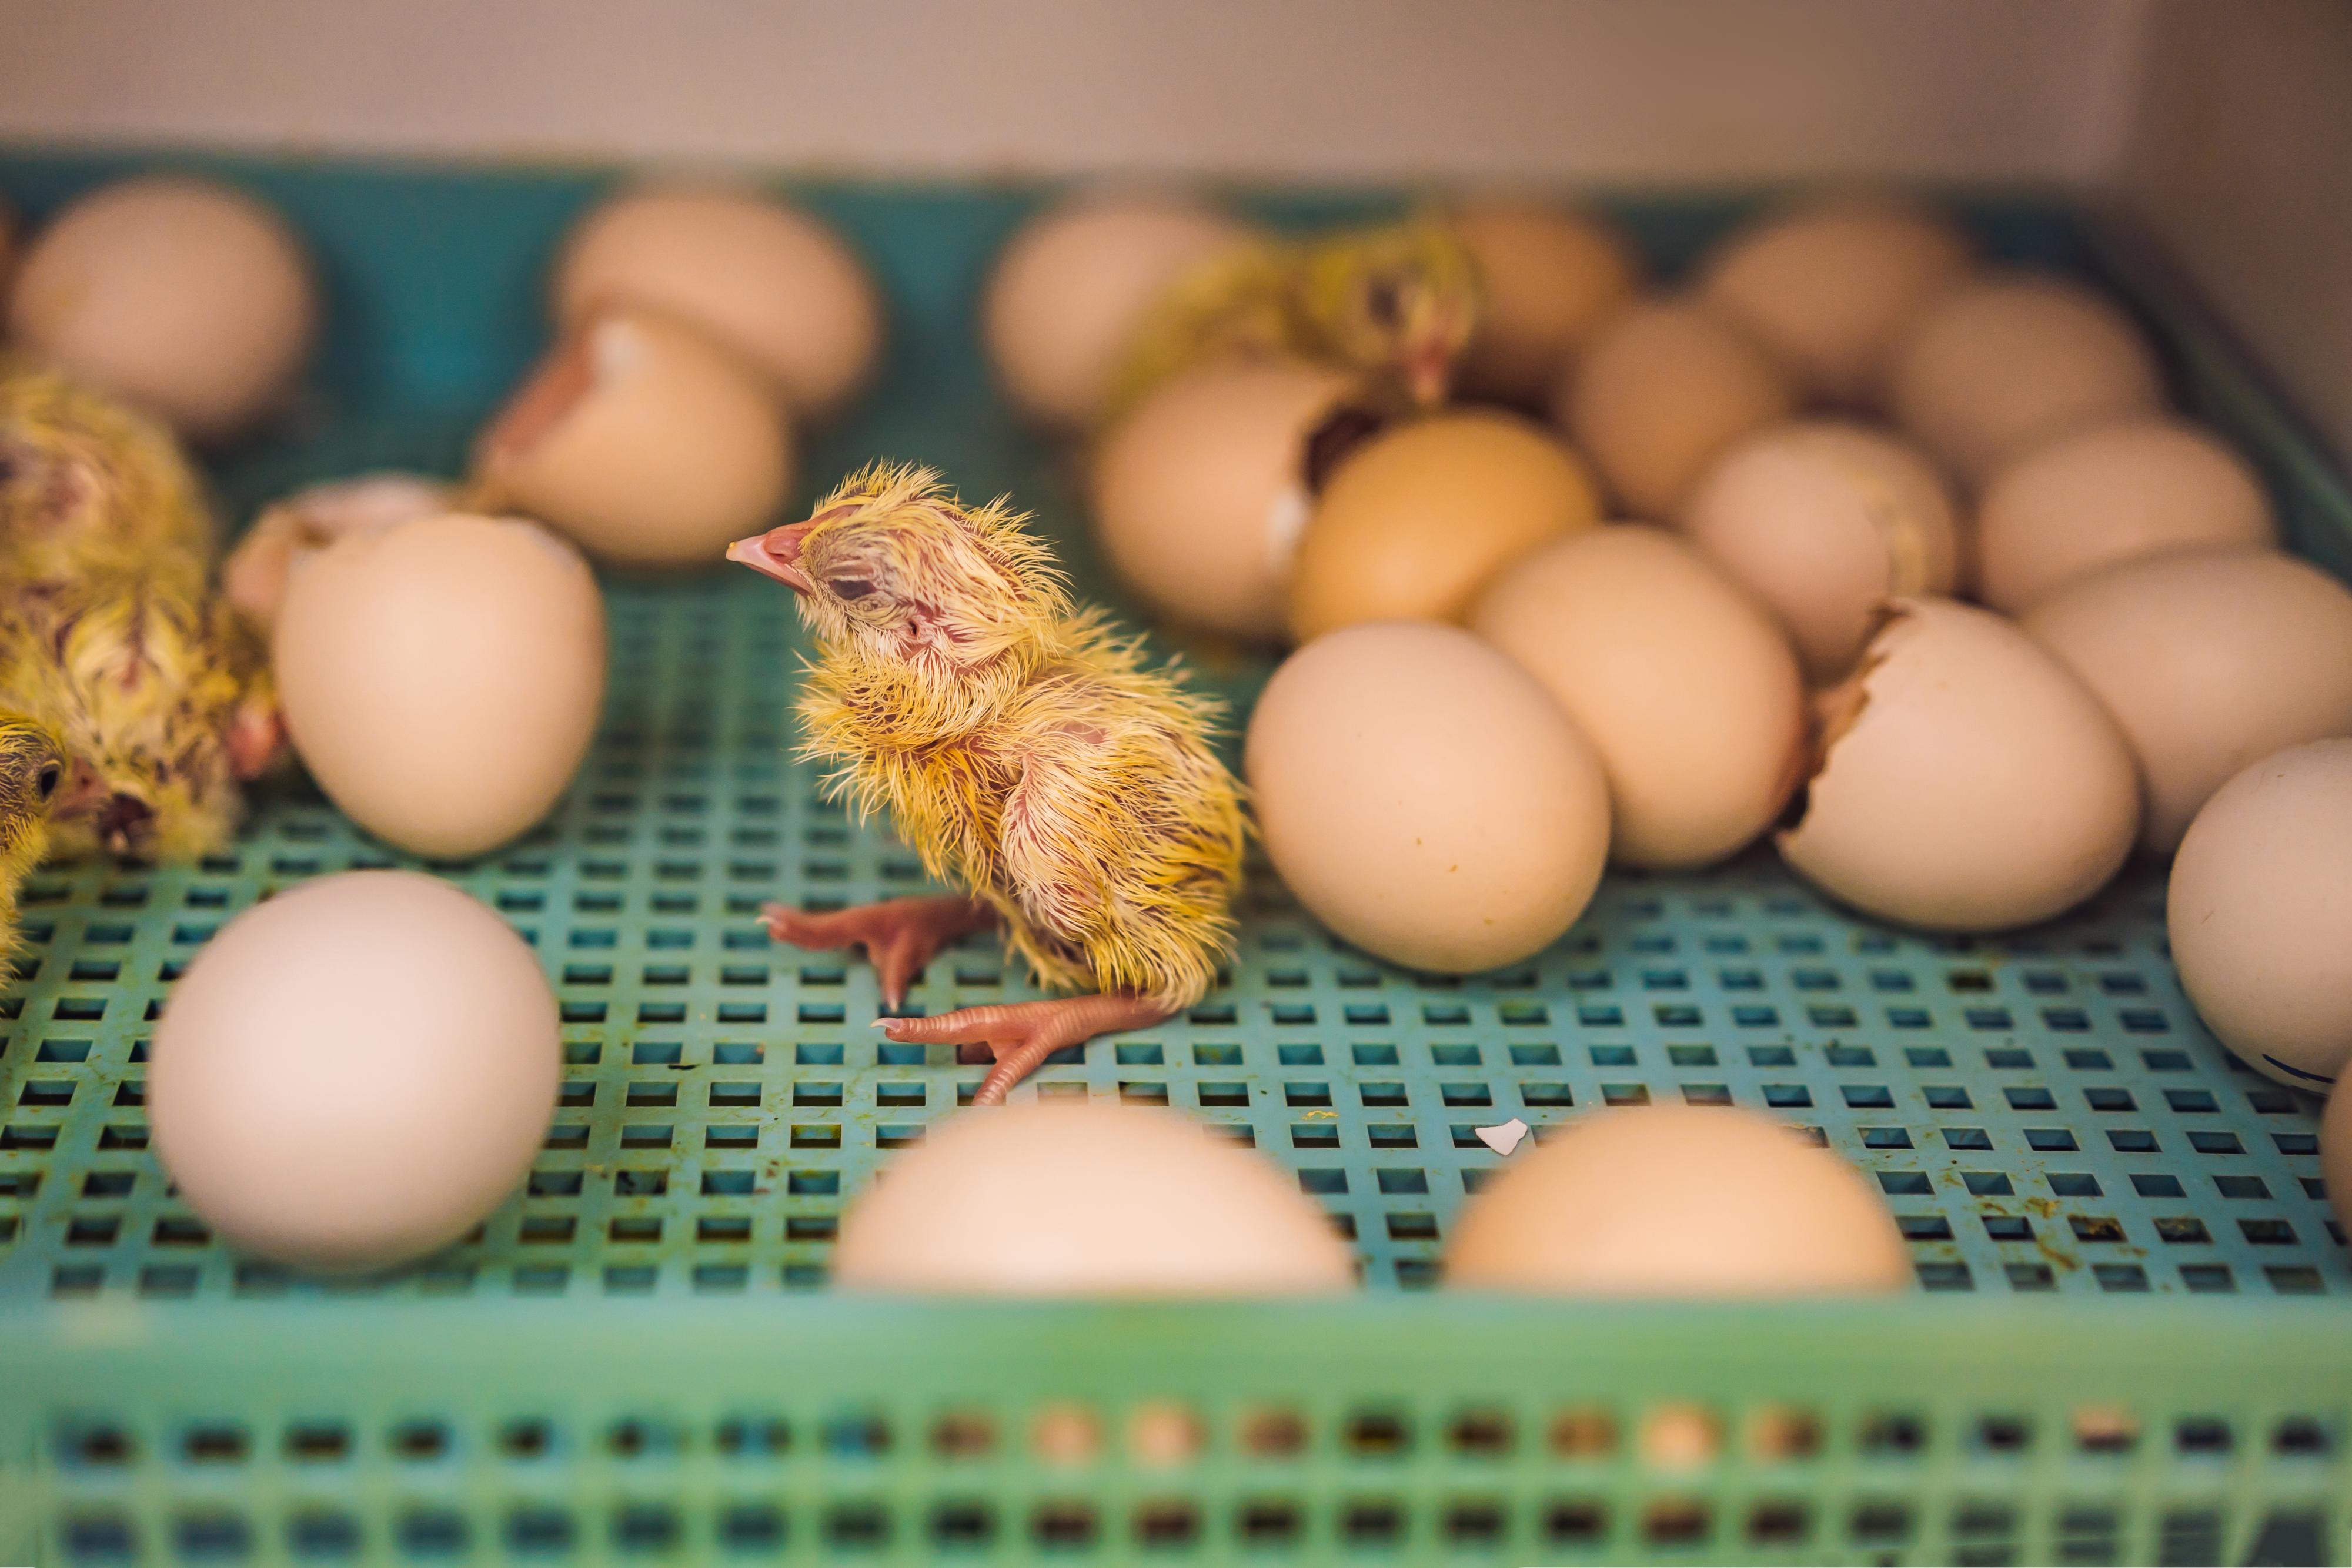 A chick emerges in the class hatchery.